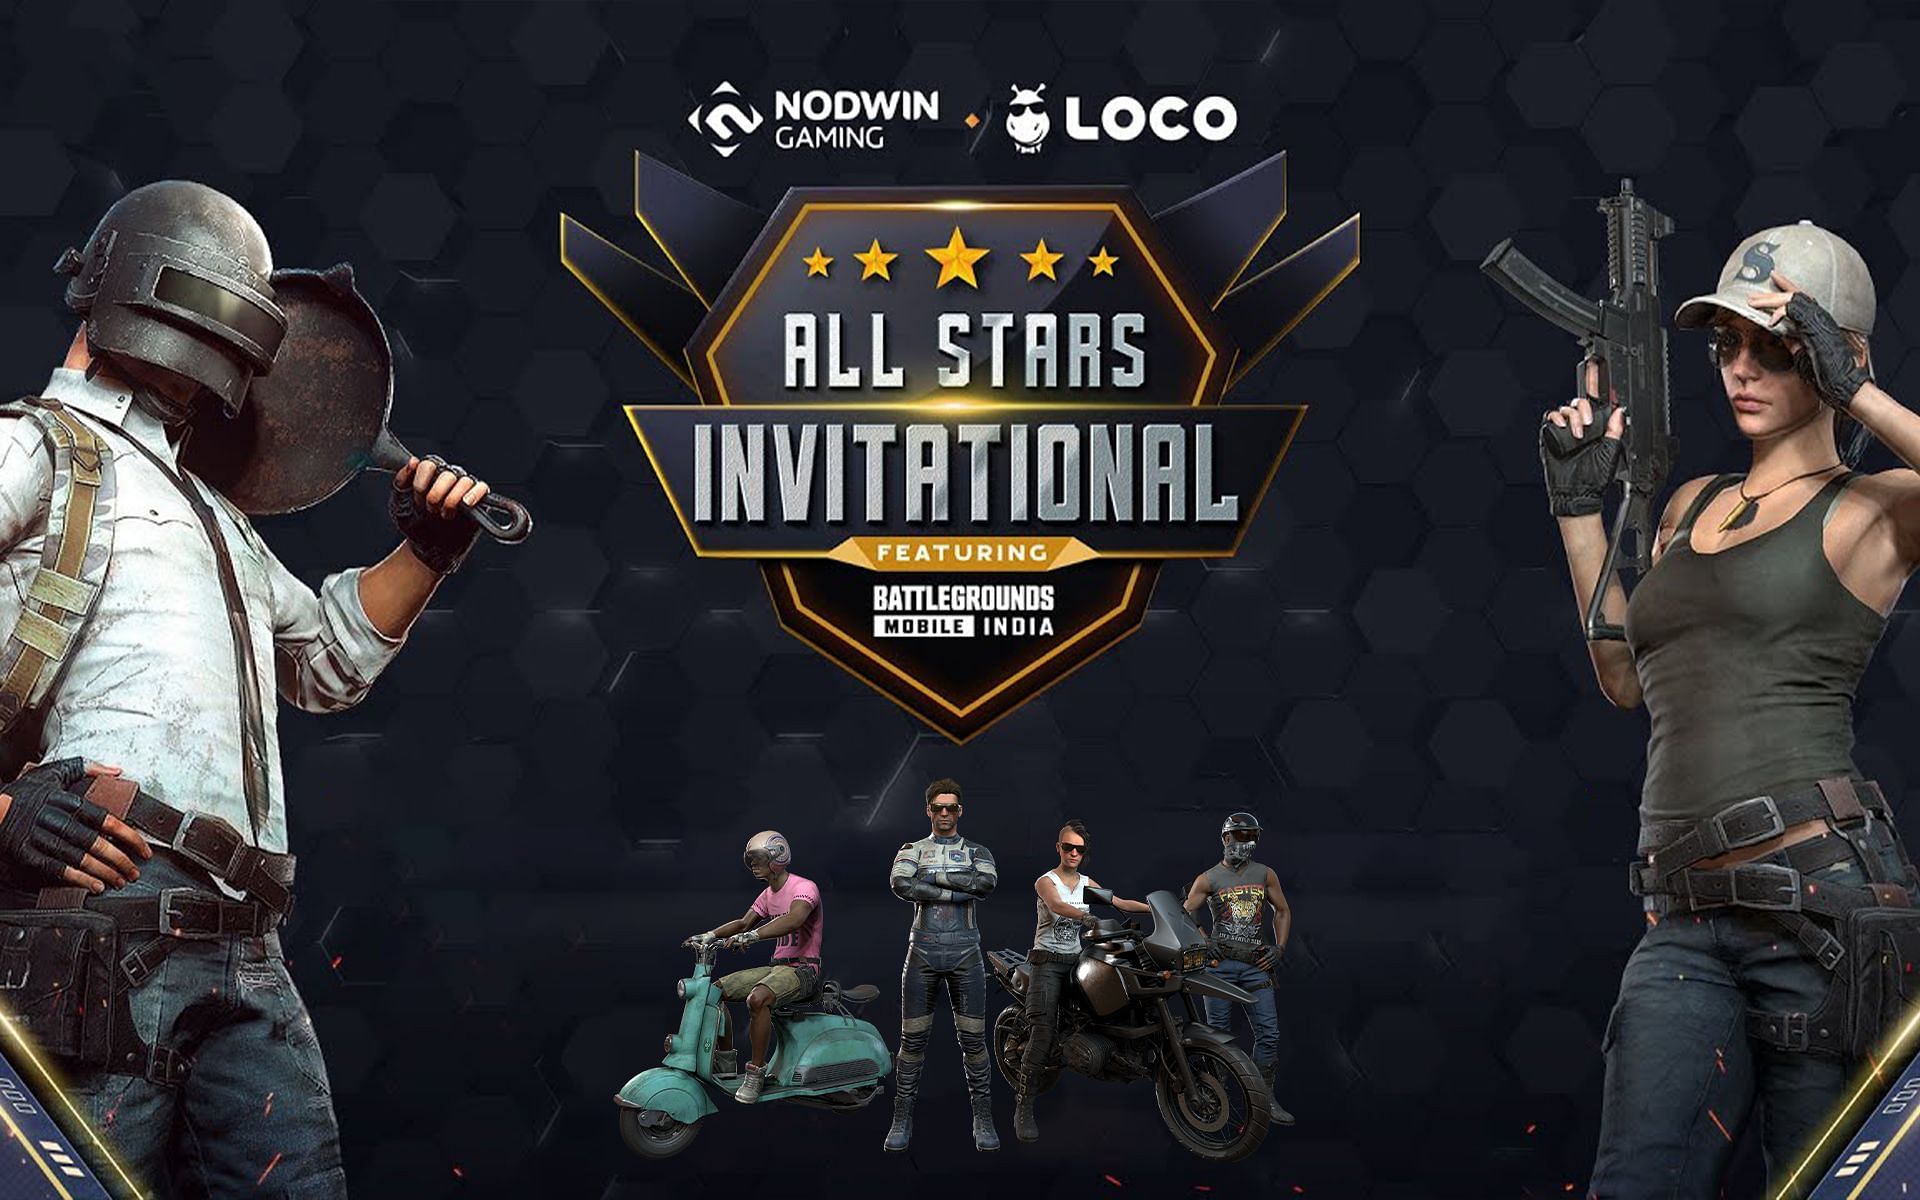 3 most consistent BGMI players from All-Stars Invitational tournament (and 2 who werent)